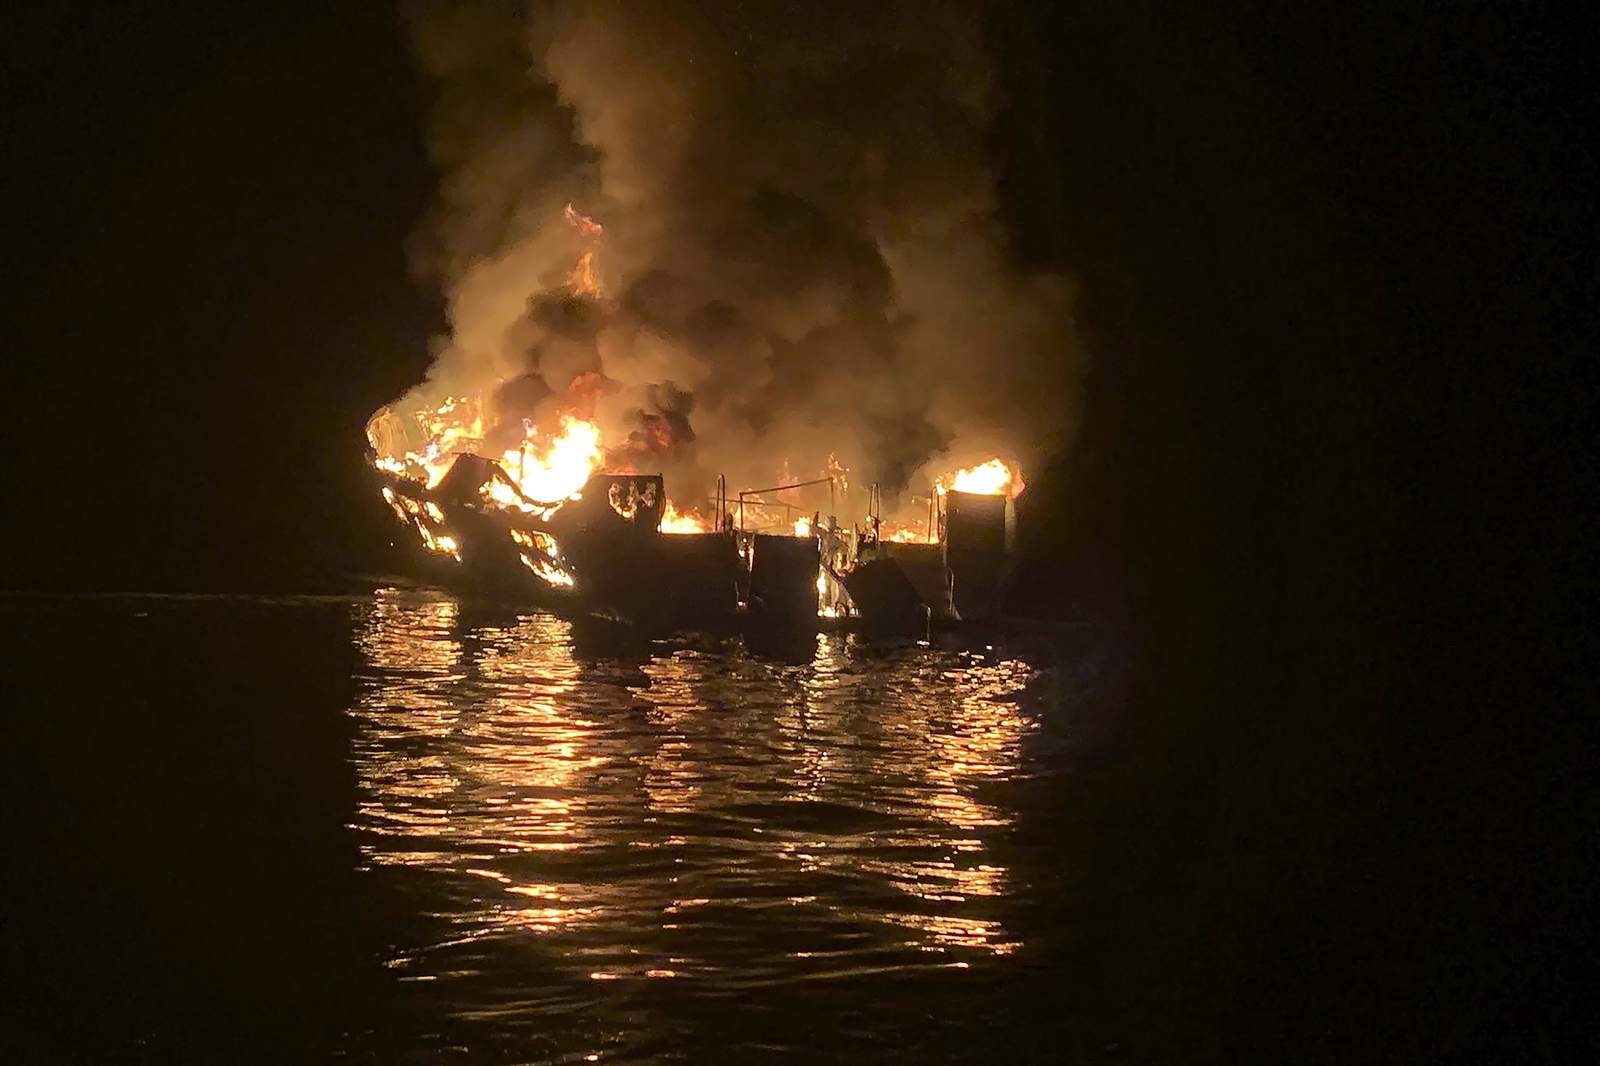 California boat owners faulted for fire that killed 34